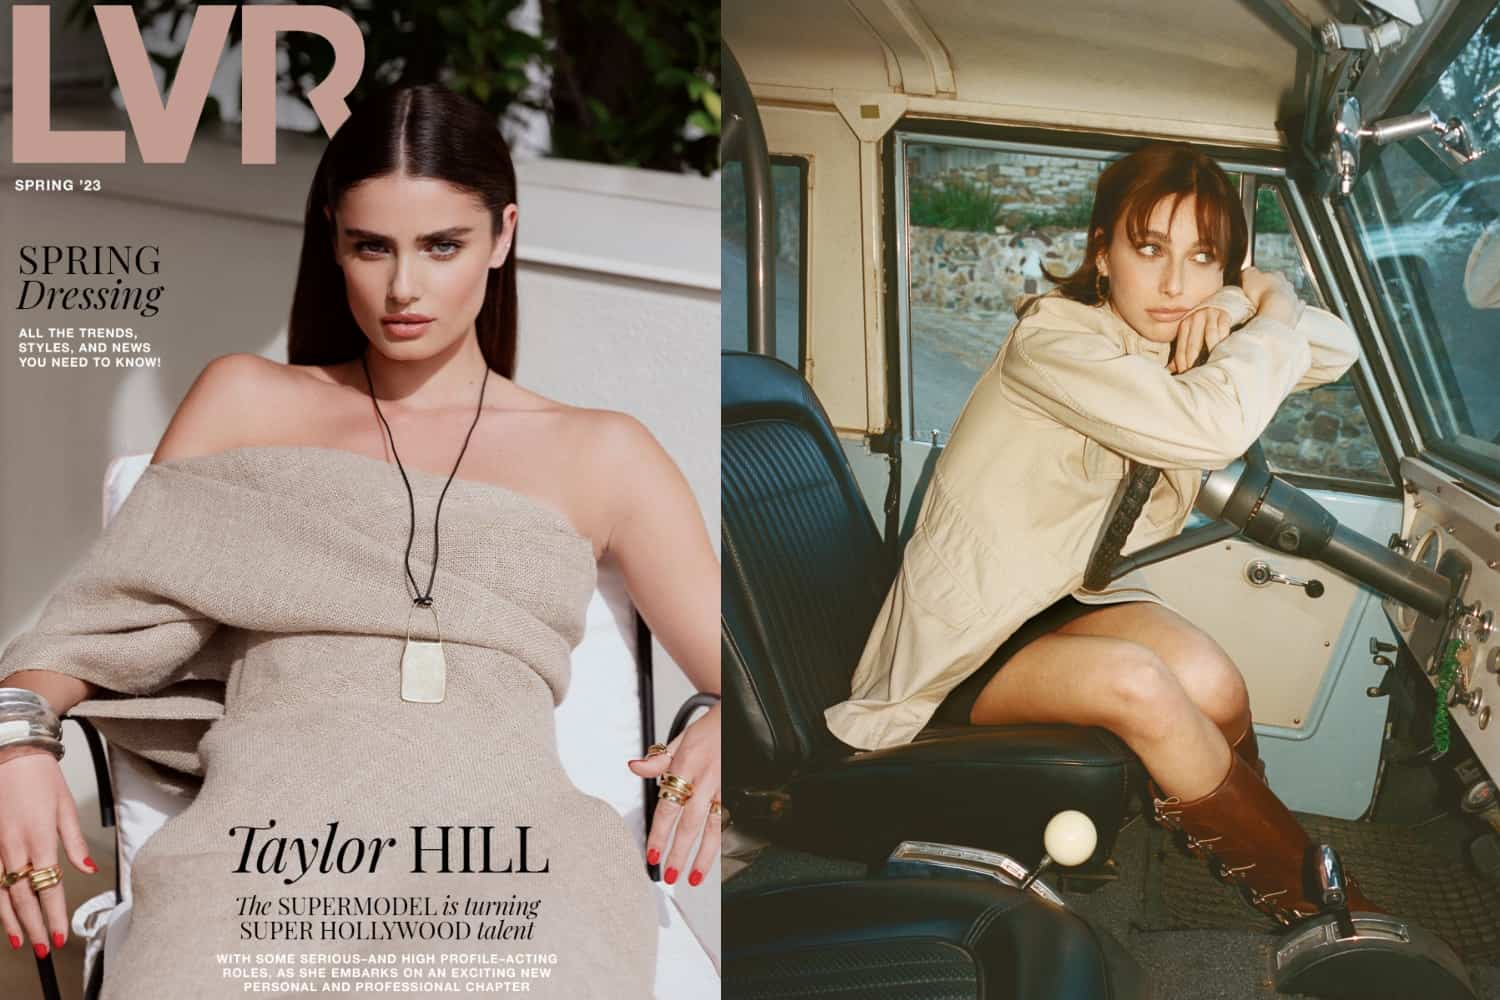 Taylor Hill Is LVR Magazine’s Stunning Spring Issue Cover Girl, Emma Chamberlain’s New Aritzia Campaign, And More!